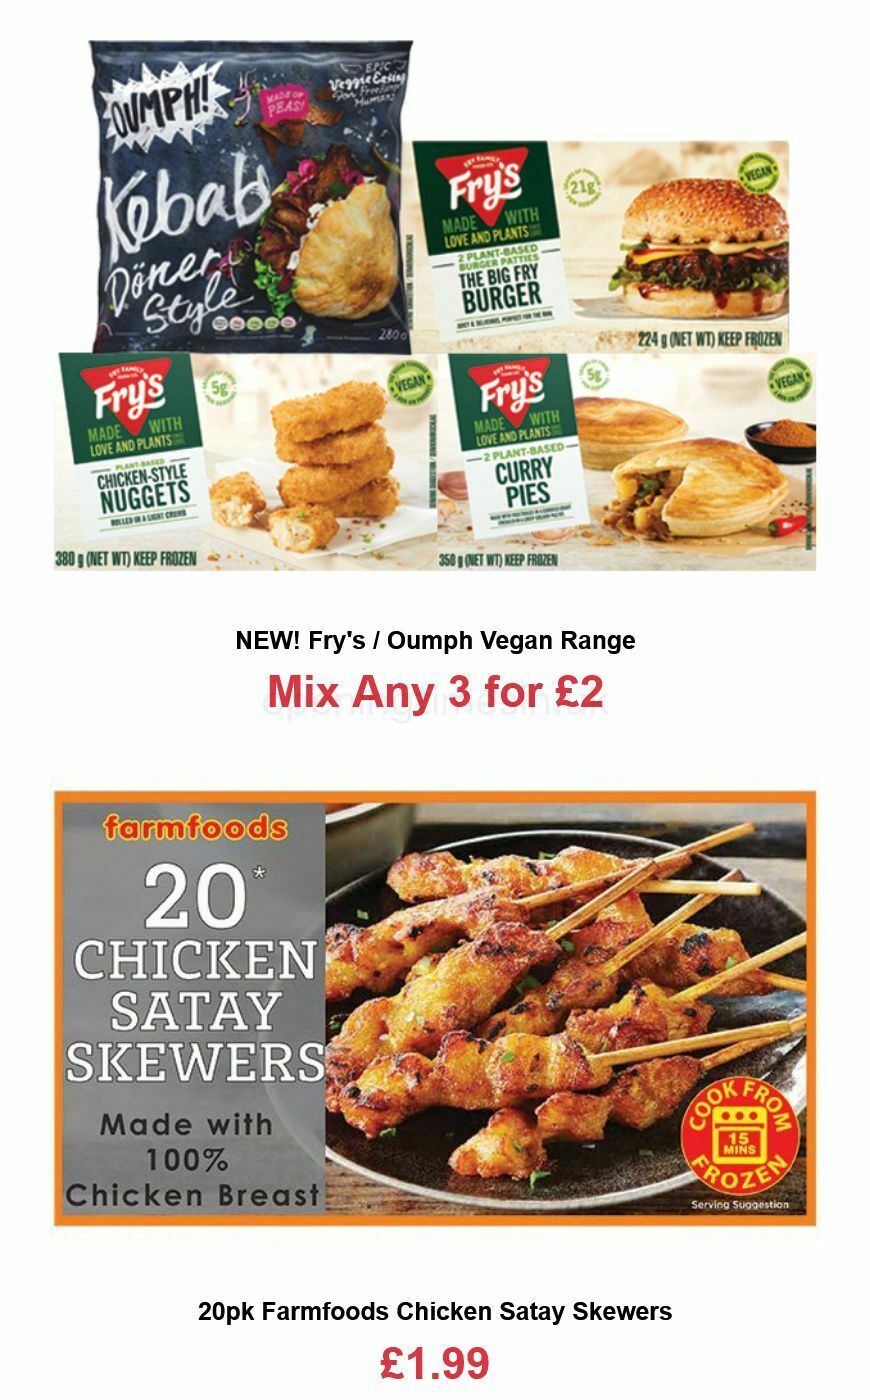 Farmfoods Offers from 24 May